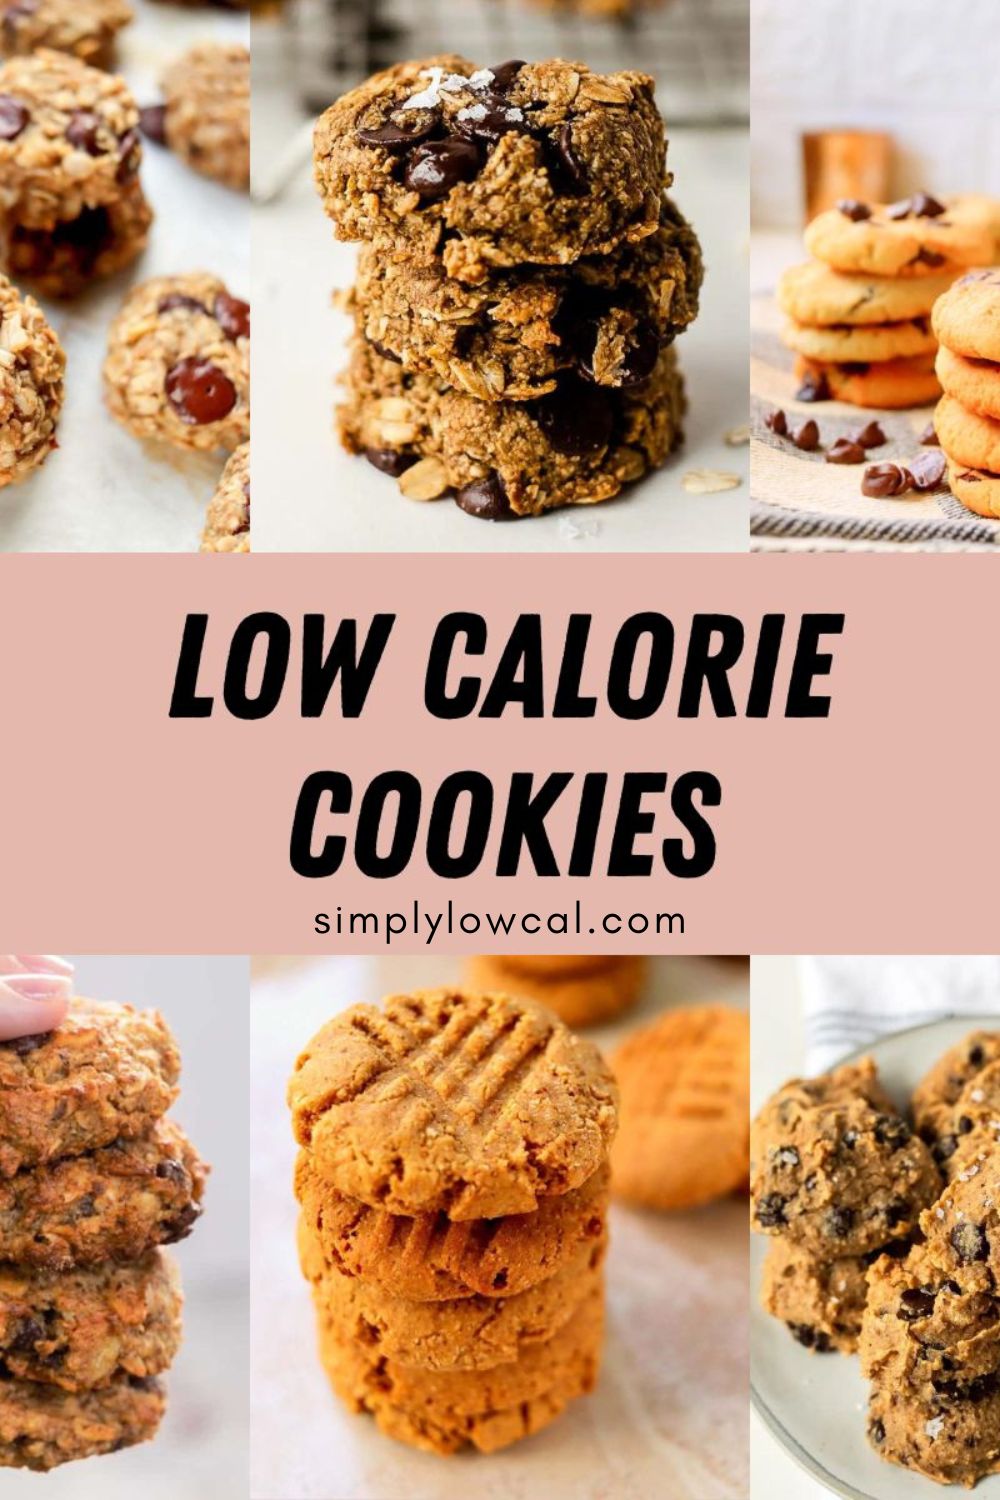 Pinterest pin for low calorie cookies.